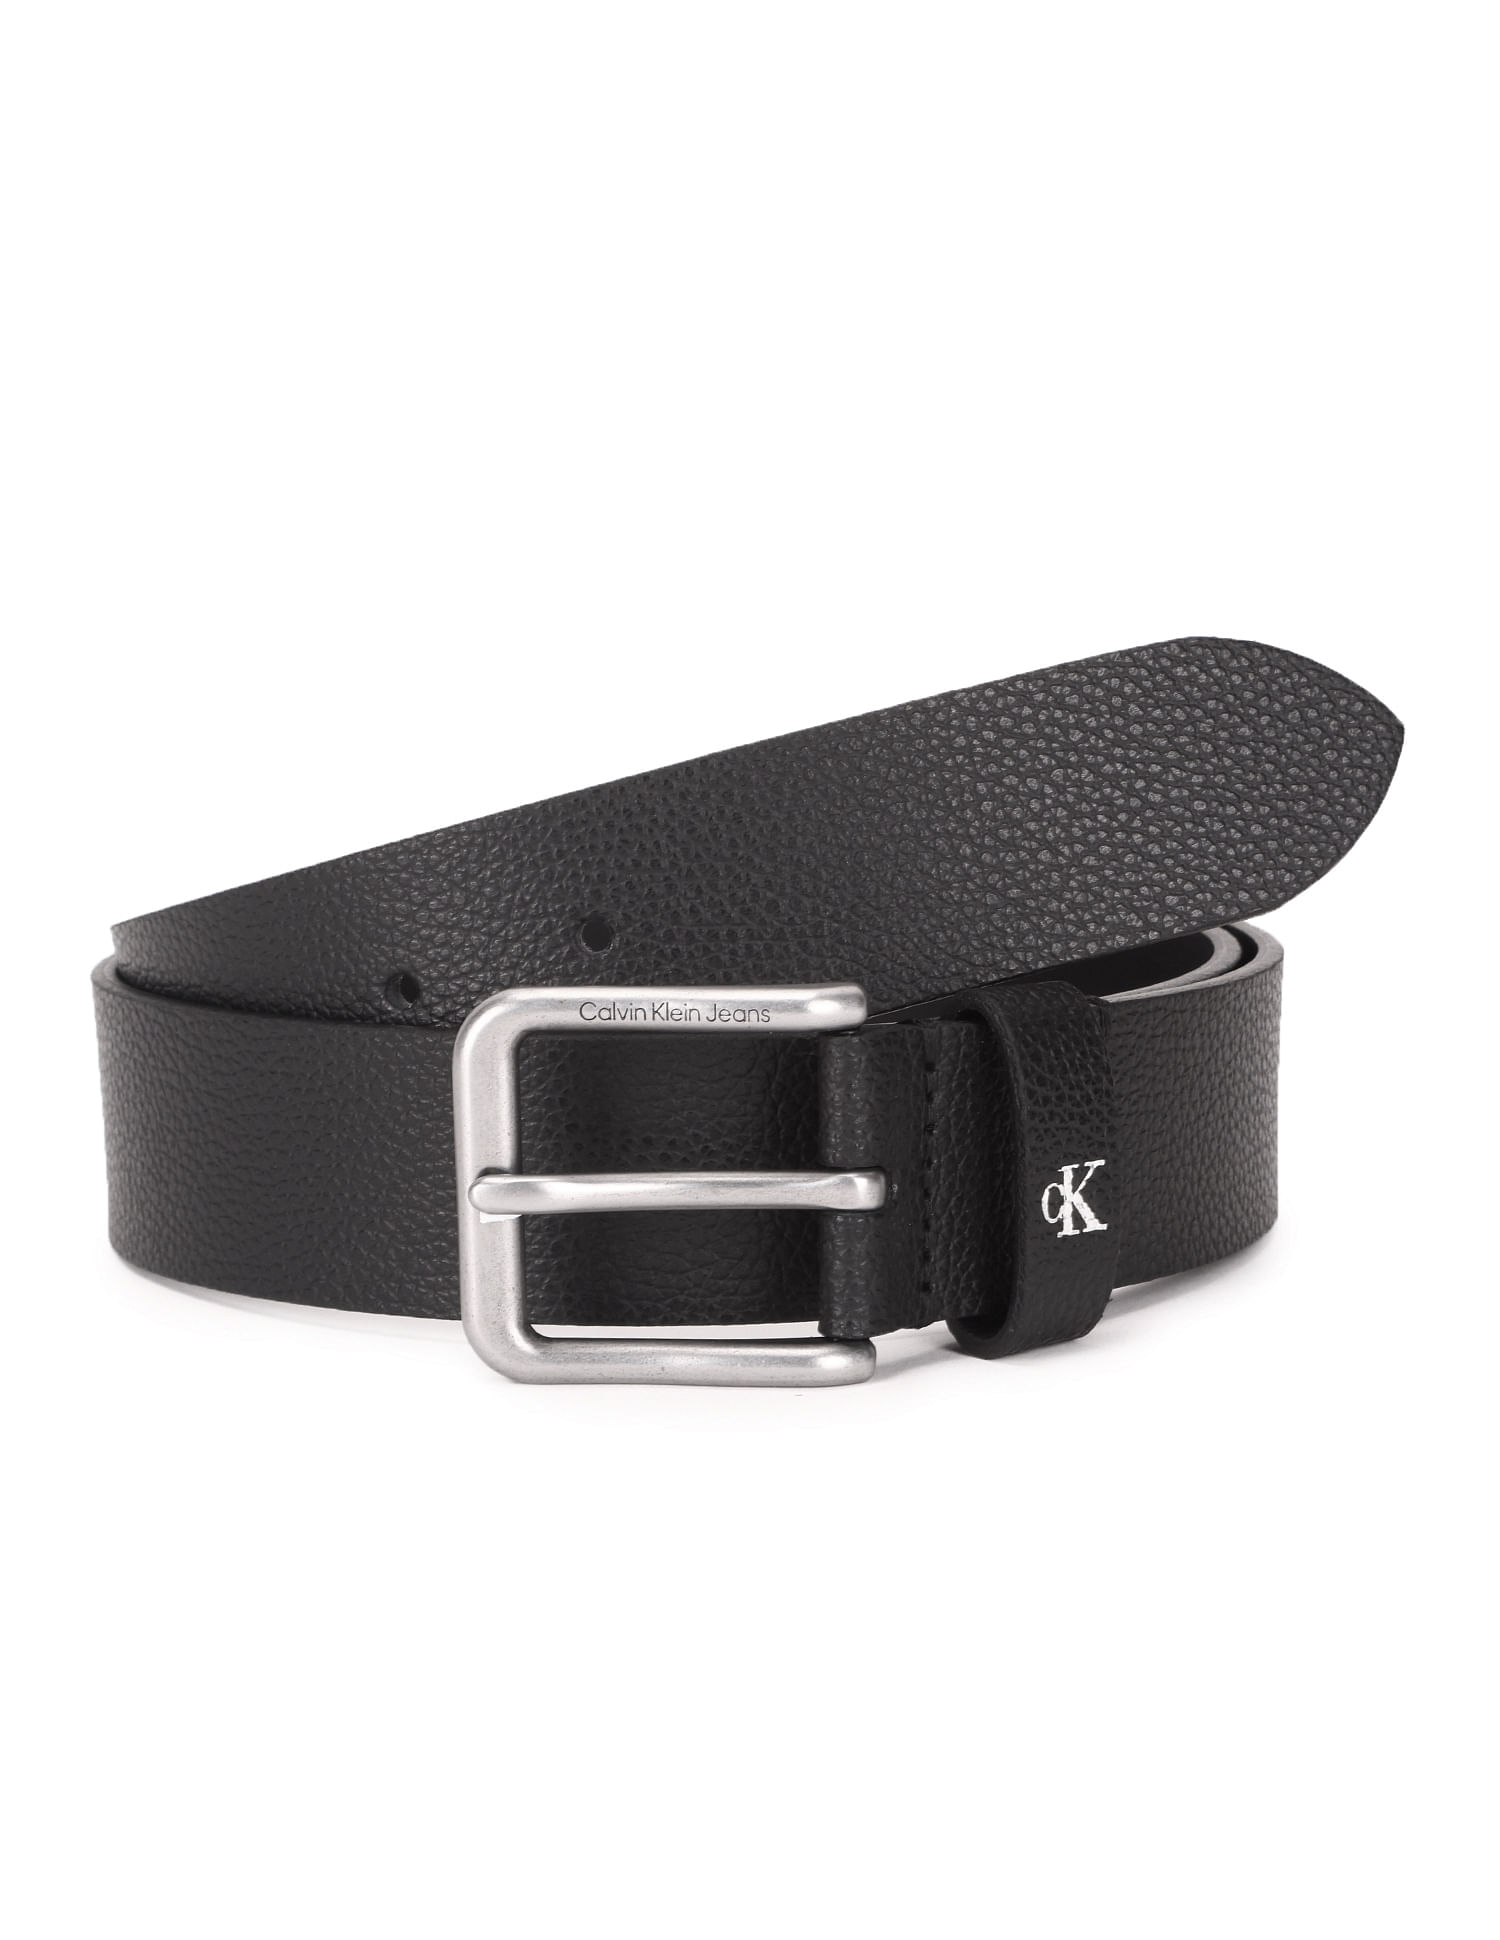 Buy Calvin Klein Belt Round Leather Classic Jeans